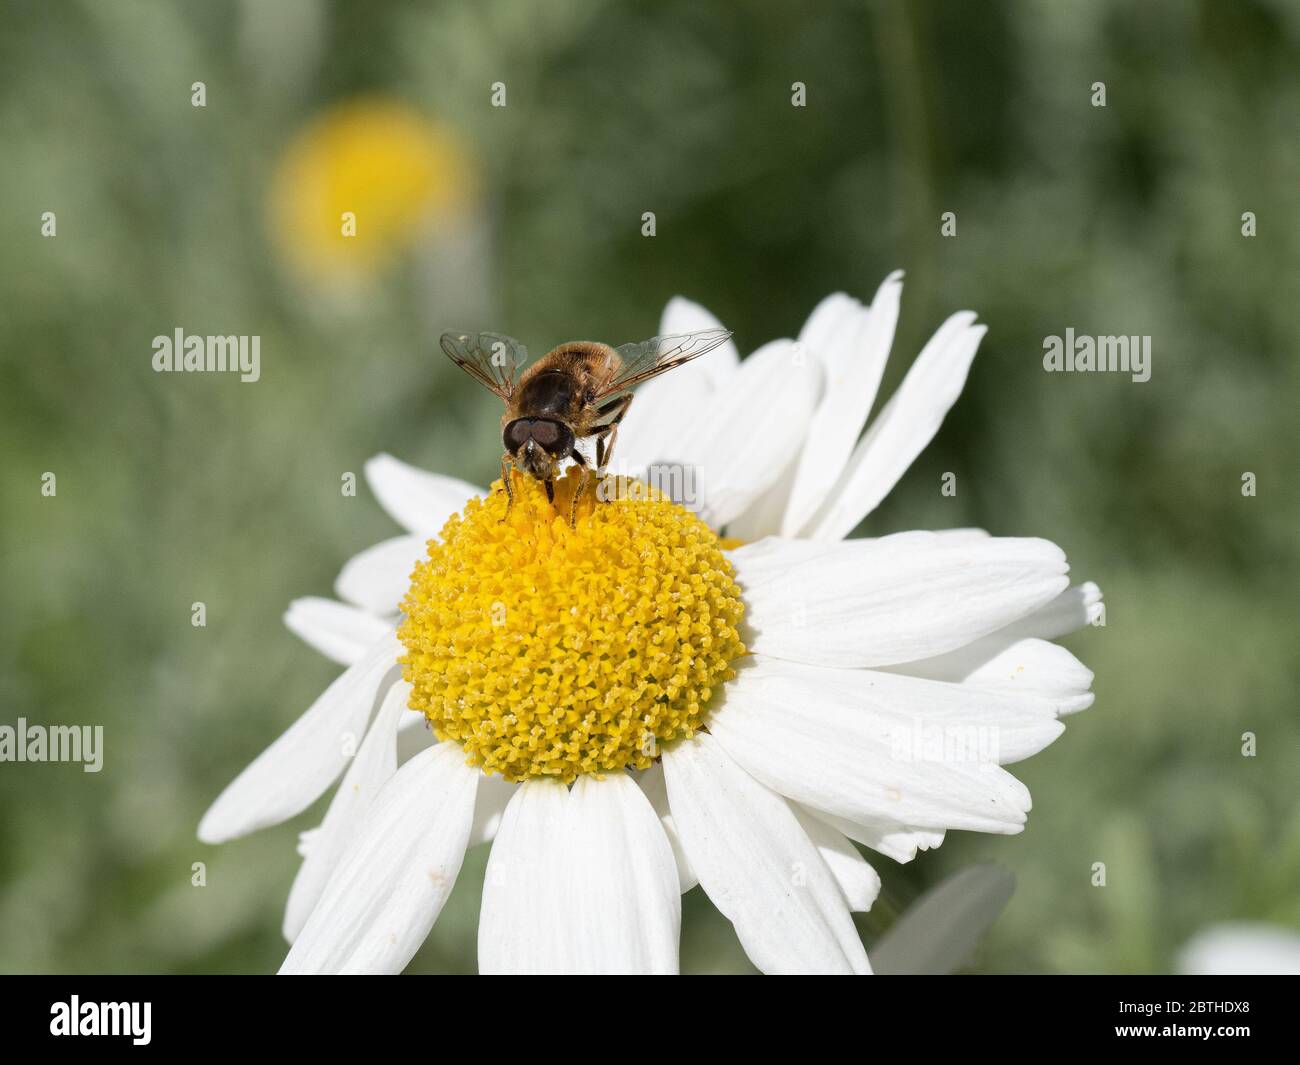 A close up of a bee feeding on a white daisy flower of Anthemis punctata subsp. cupaniana Stock Photo